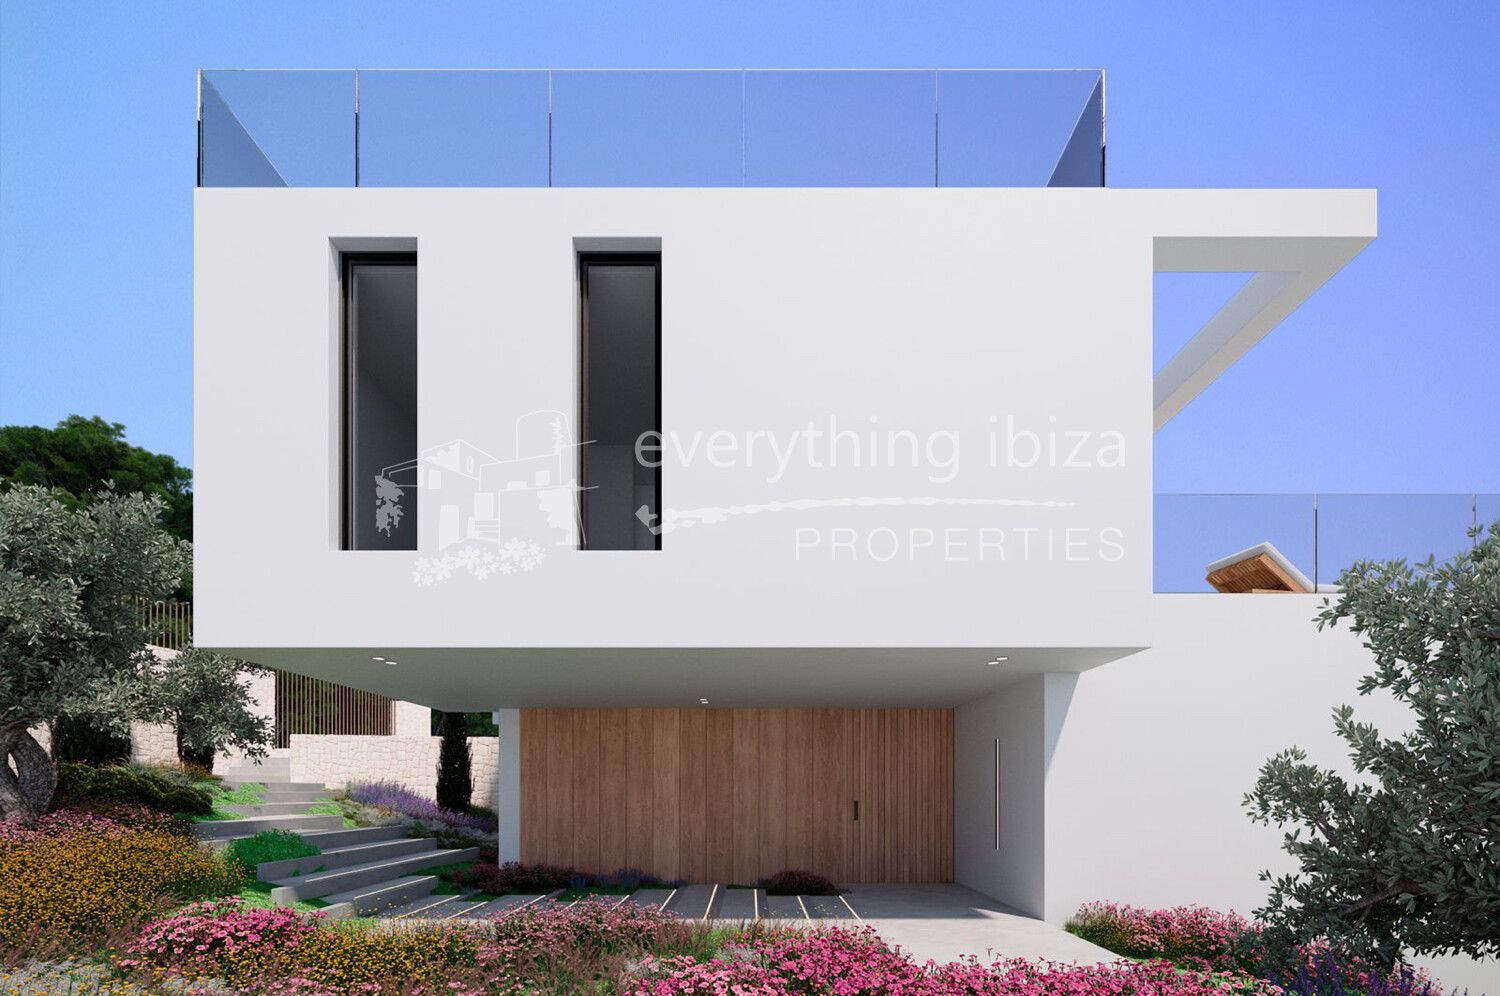 Luxury New Build Mediterranean Styled Villas in a Desirable Excellent Location, ref. 1697, for sale in Ibiza by everything ibiza Properties